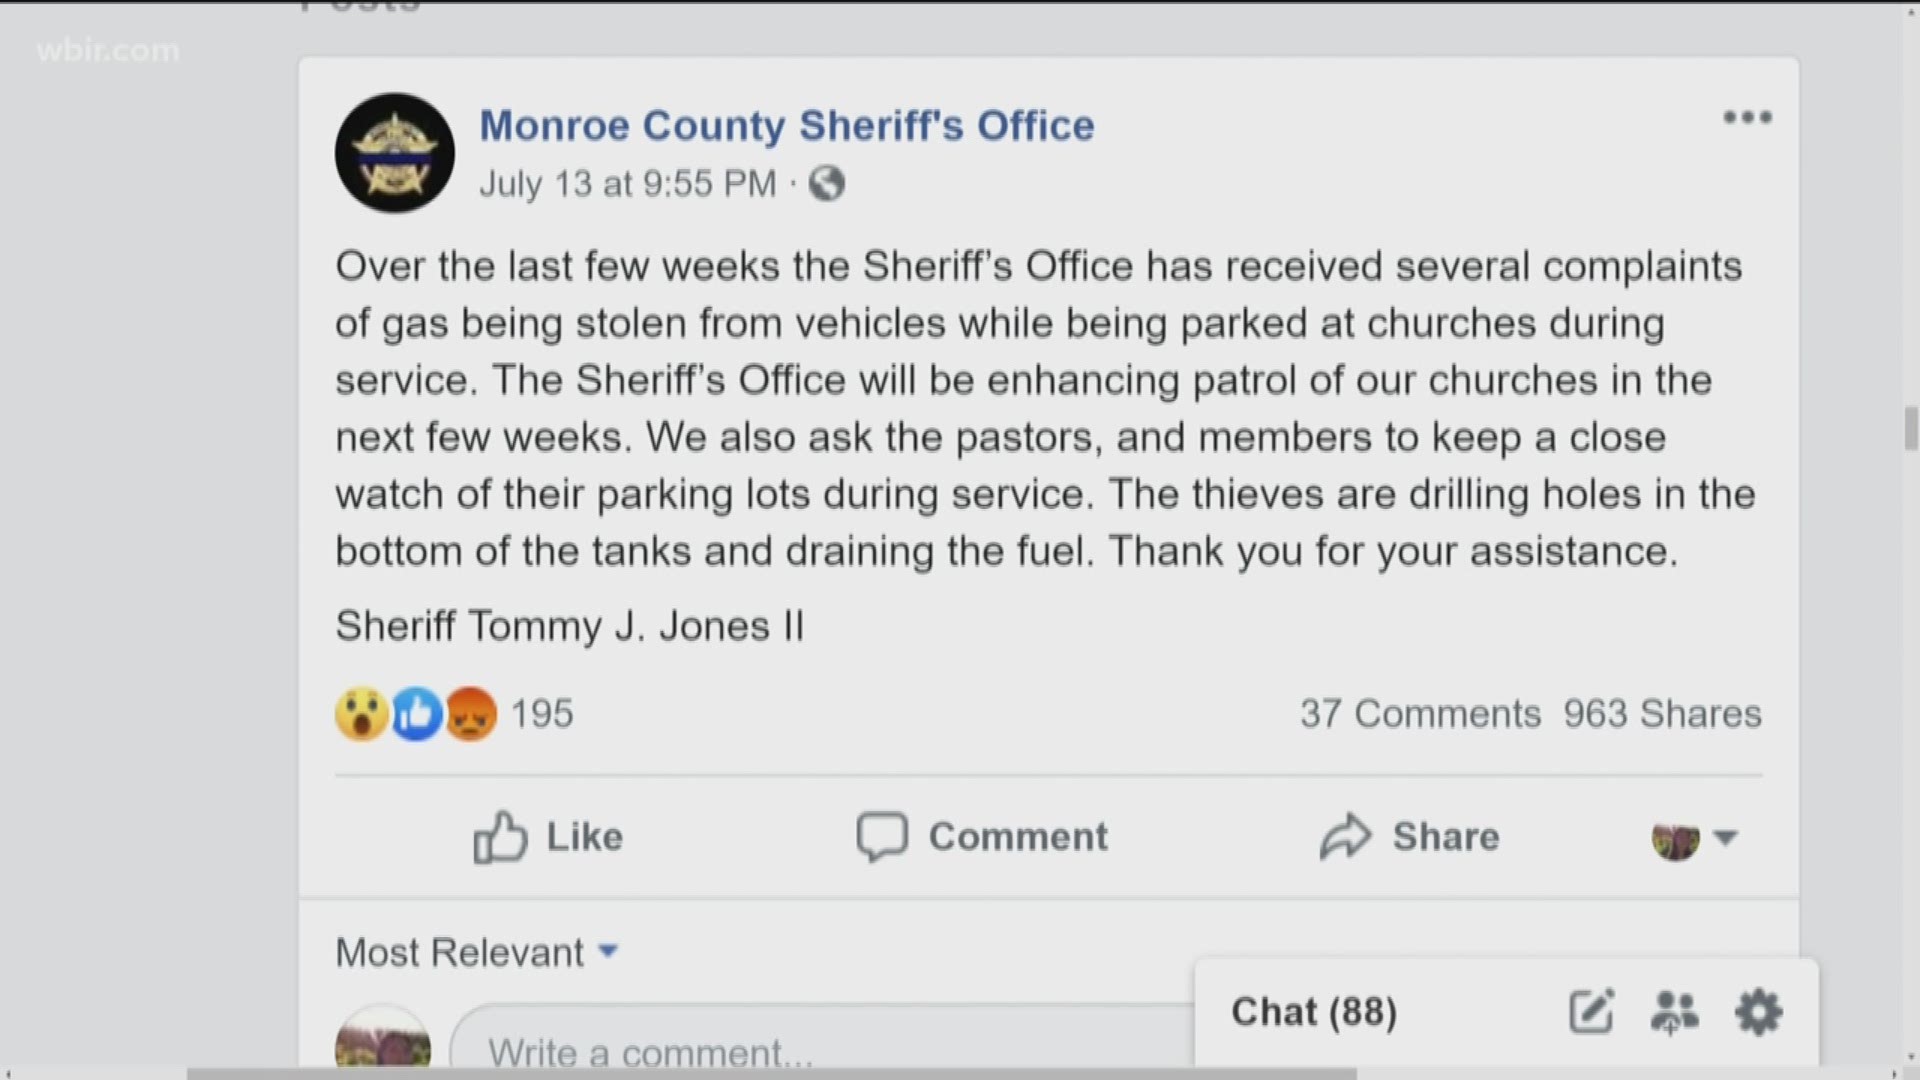 The Monroe County Sheriff's Office is warning drivers about gas thieves targeting church parking lots. The sheriff's office said thieves are drilling holes in the bottom of gas tanks and draining the fuel from cars parked during services.